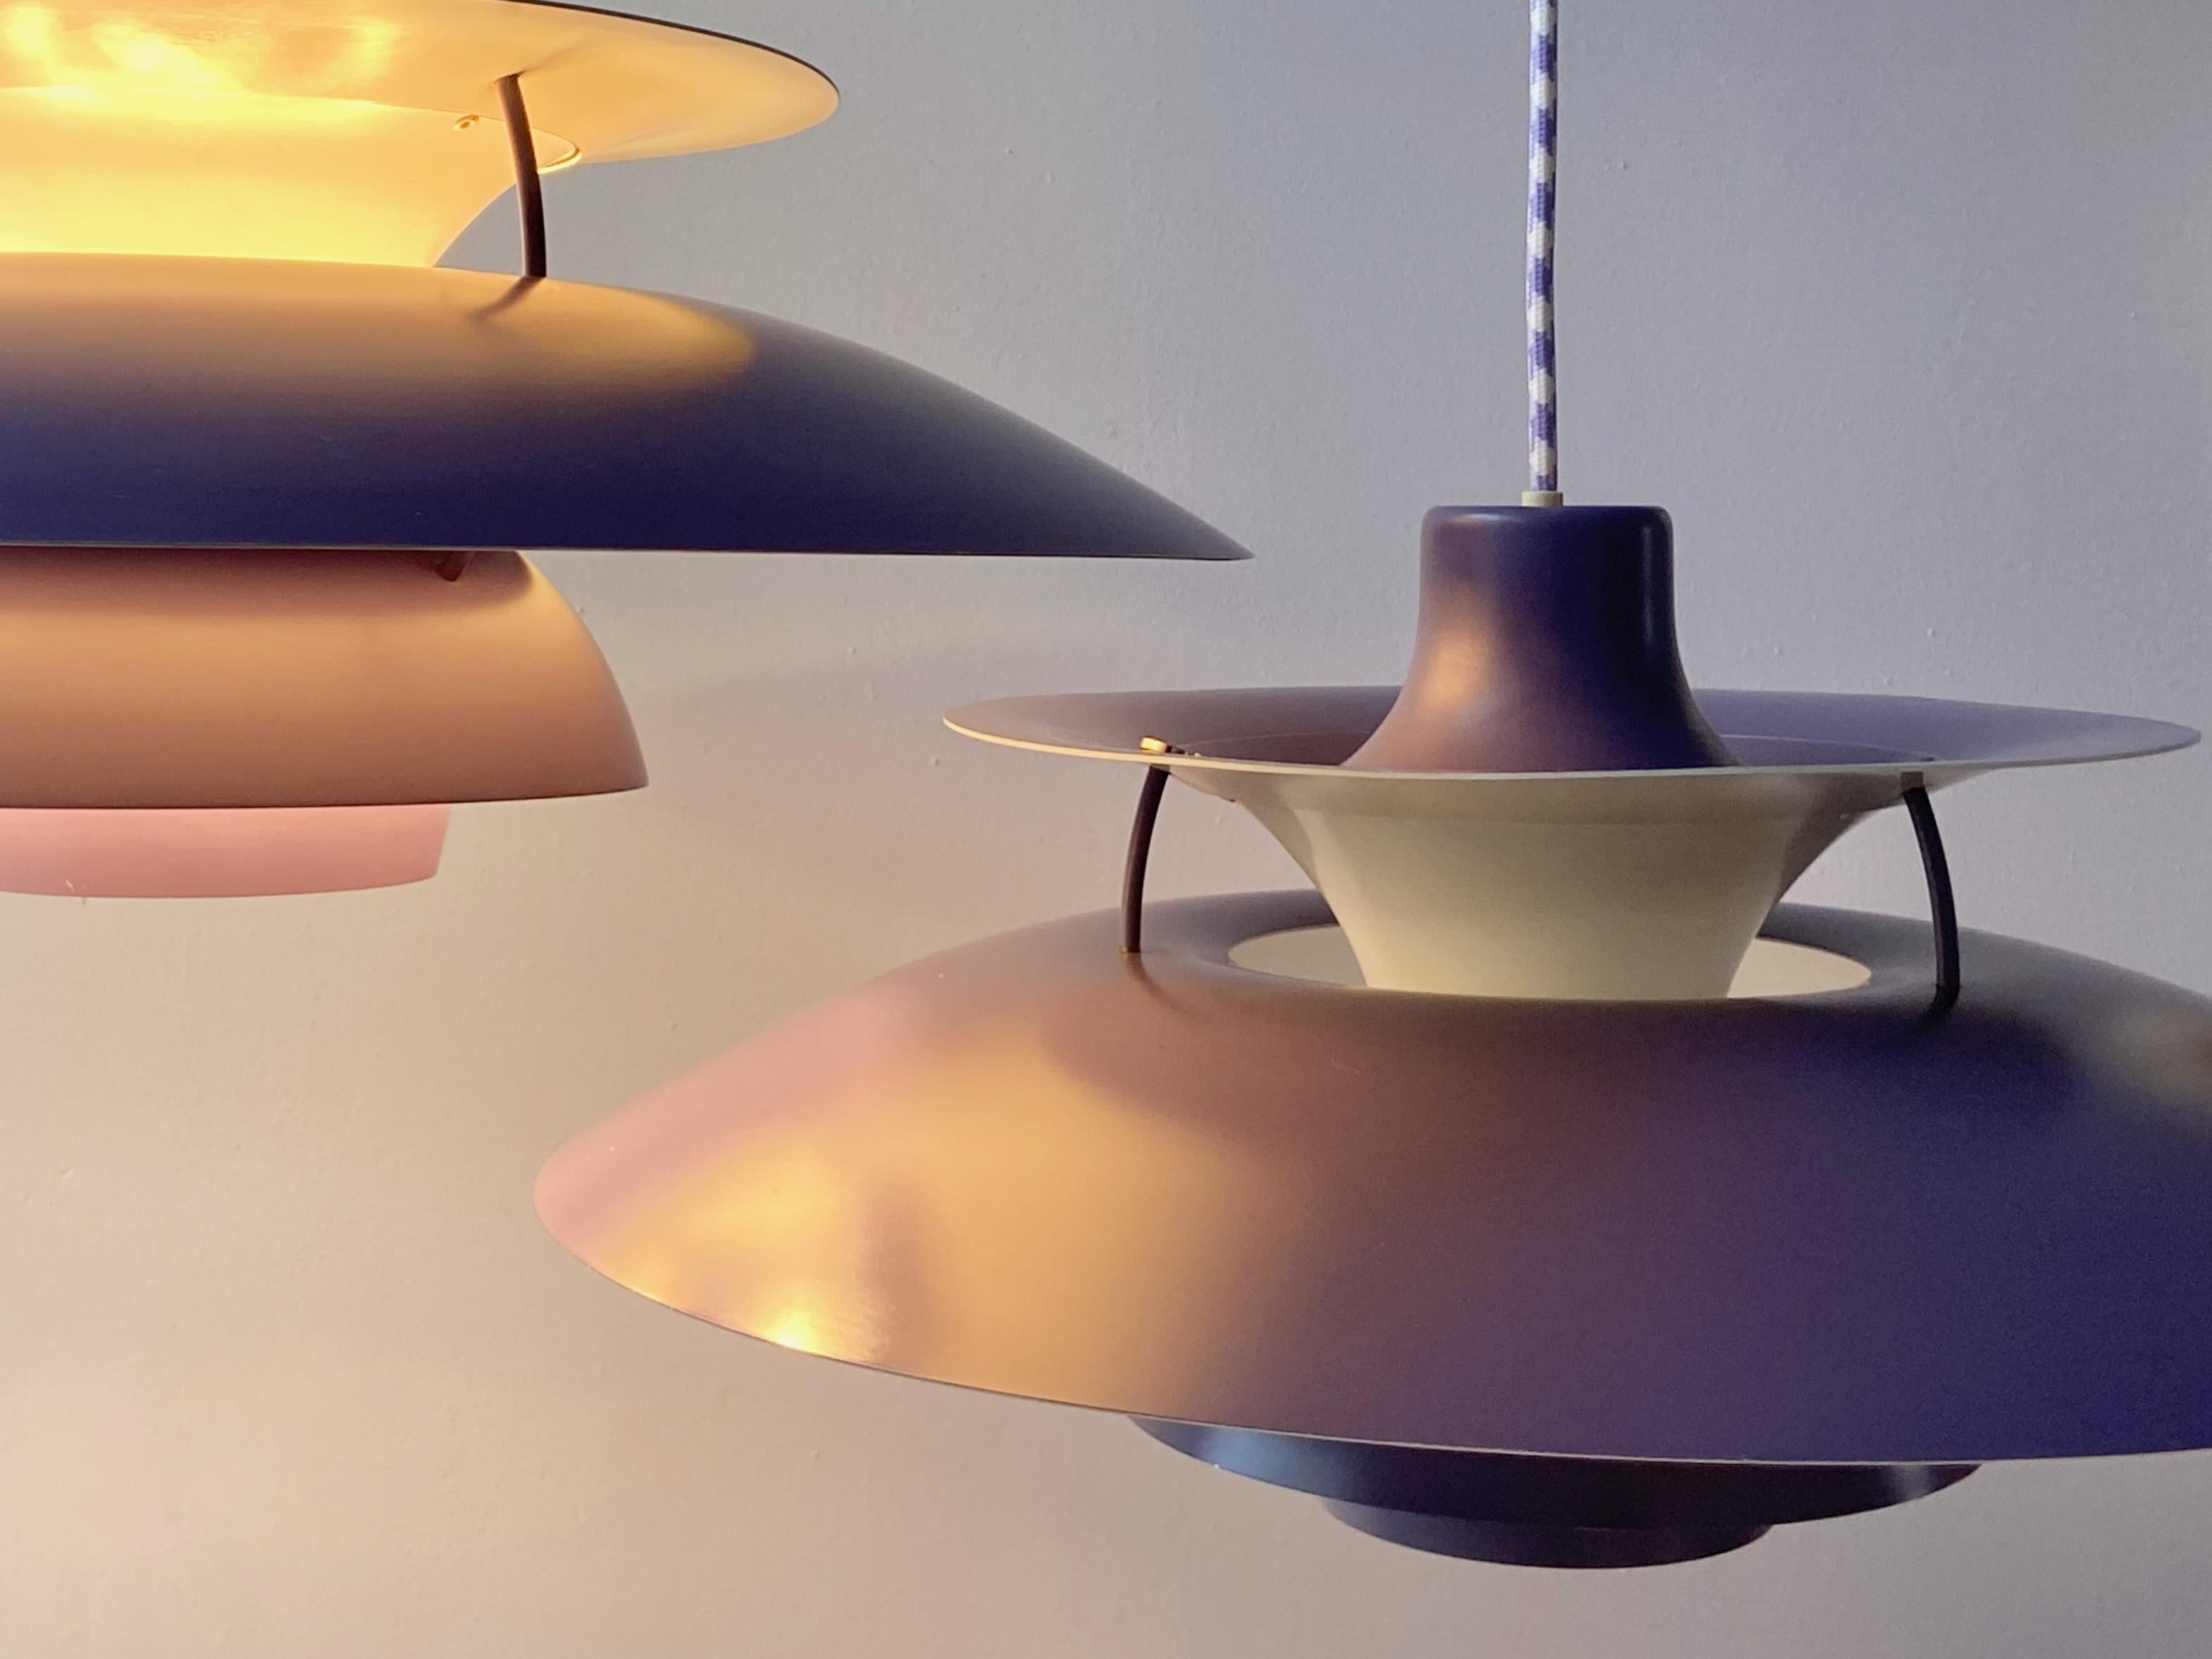 Nice purple PH5 pendant lamp design by Poul Henningsen produced by Louis Poulsen, Made in Denmark. This is the nice old Version with the orange circle plate for the socket. The lamp is in very nice condition. No parts missing, no dents. 
With new